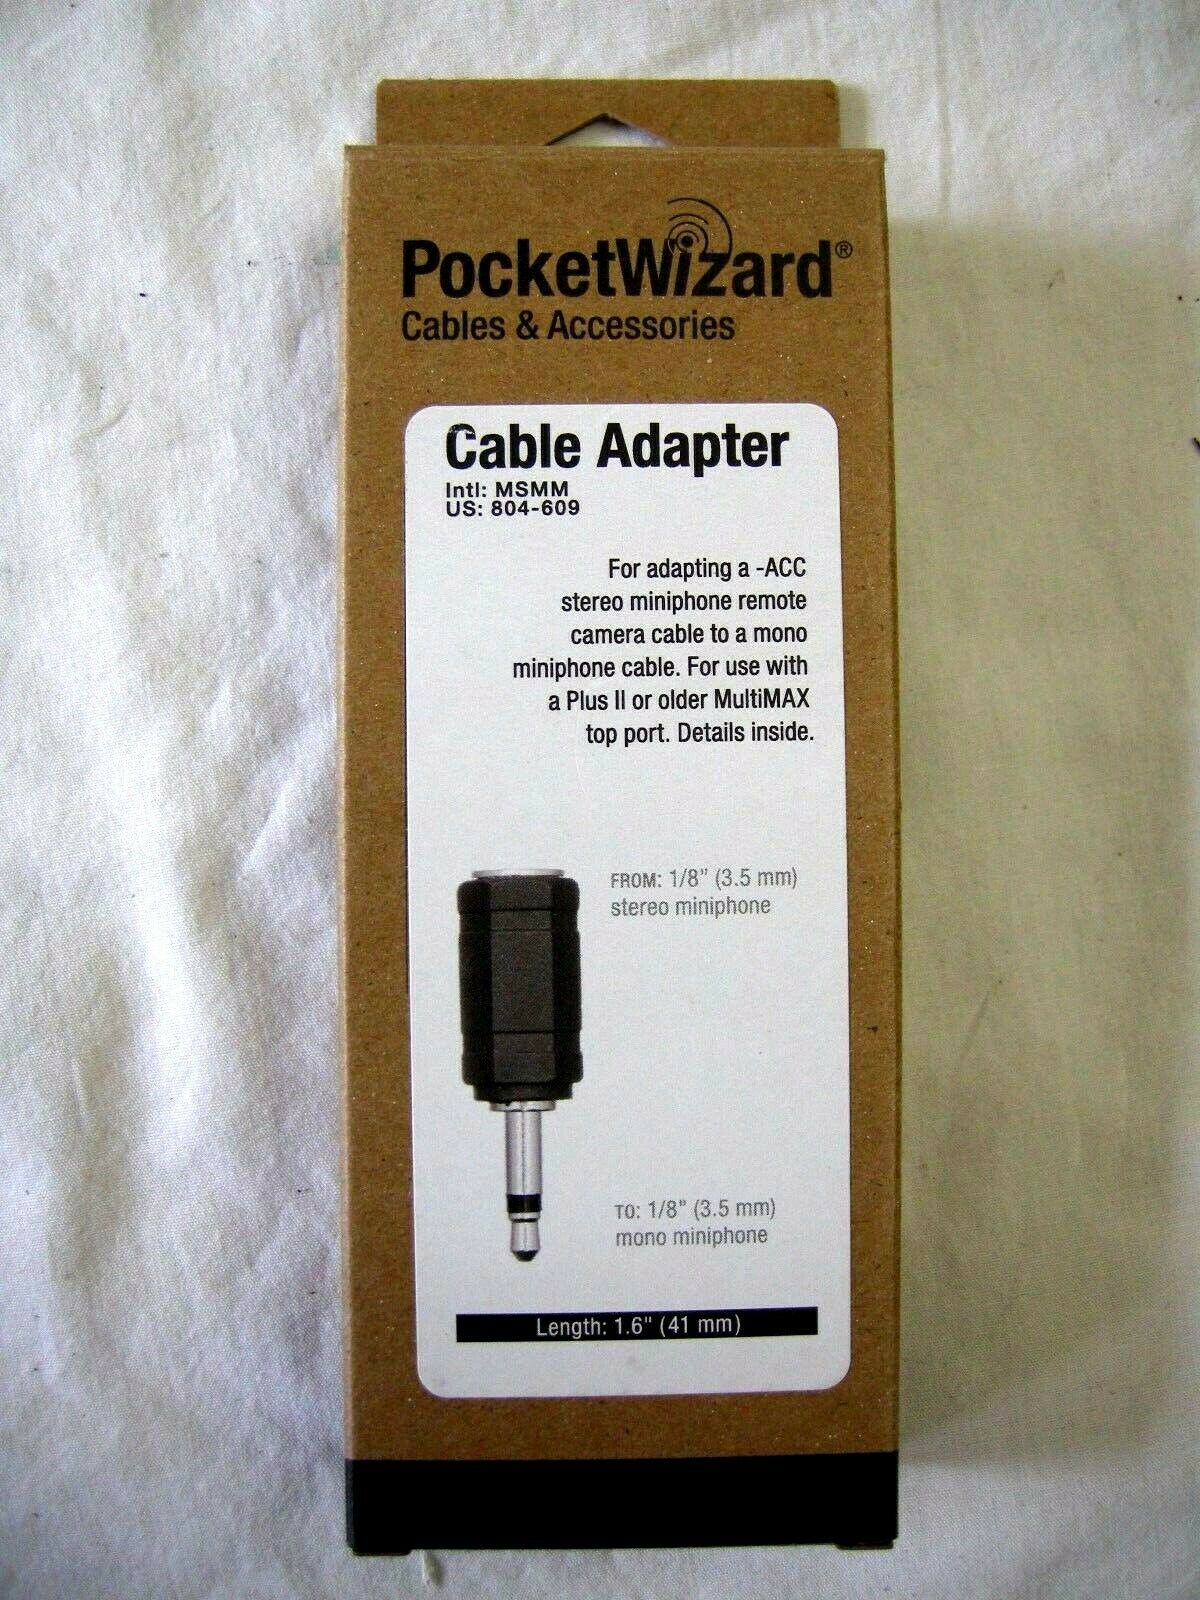 Pocket Wizard 804-609 MSMM Adapter for Stereo Miniphone - Mono Miniphone, 804609